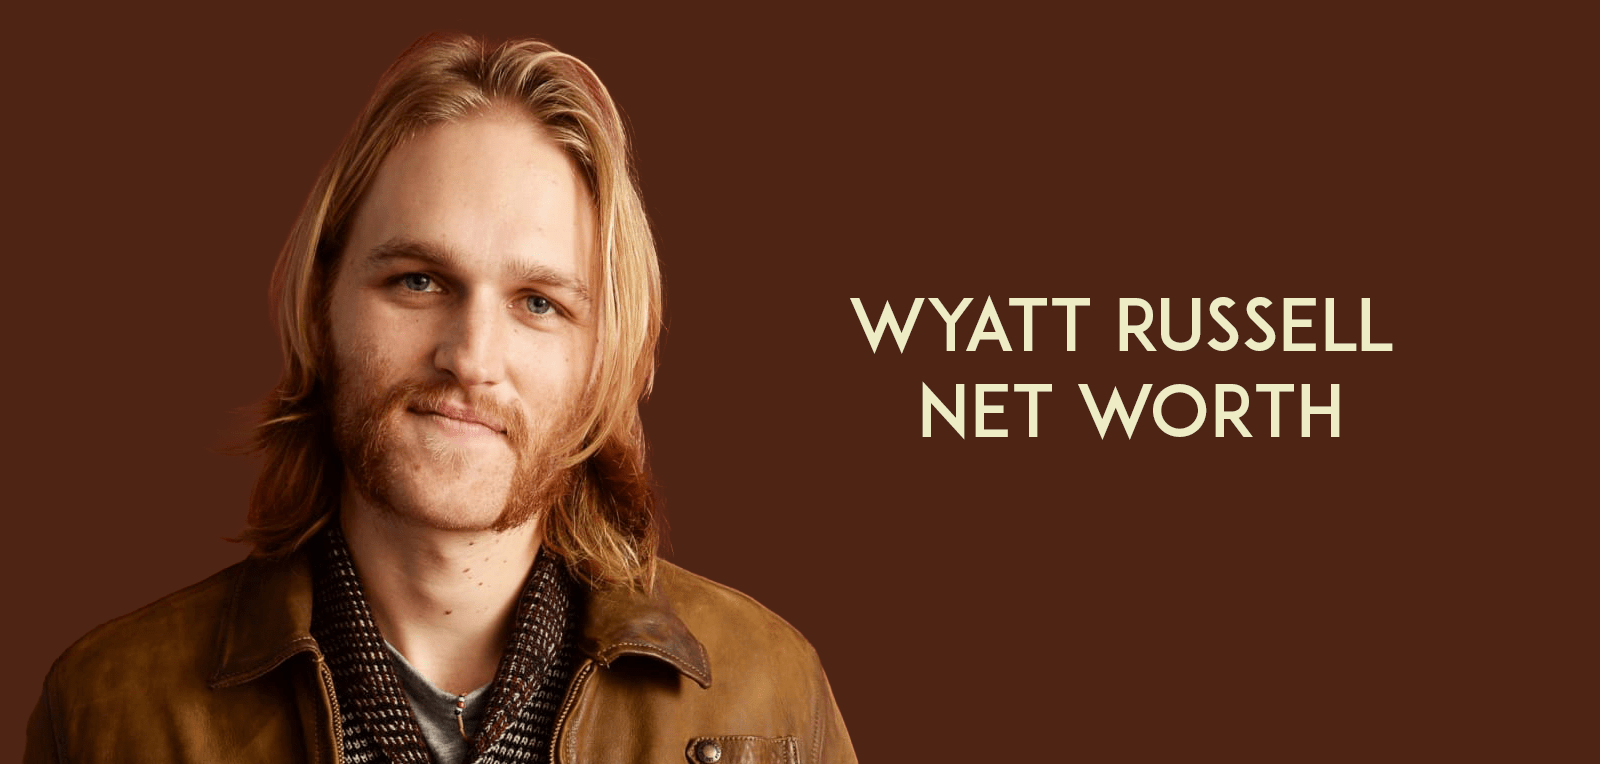 Wyatt Russell (Wiki) Wyatt Russell's Net Worth, Early Life, Career and